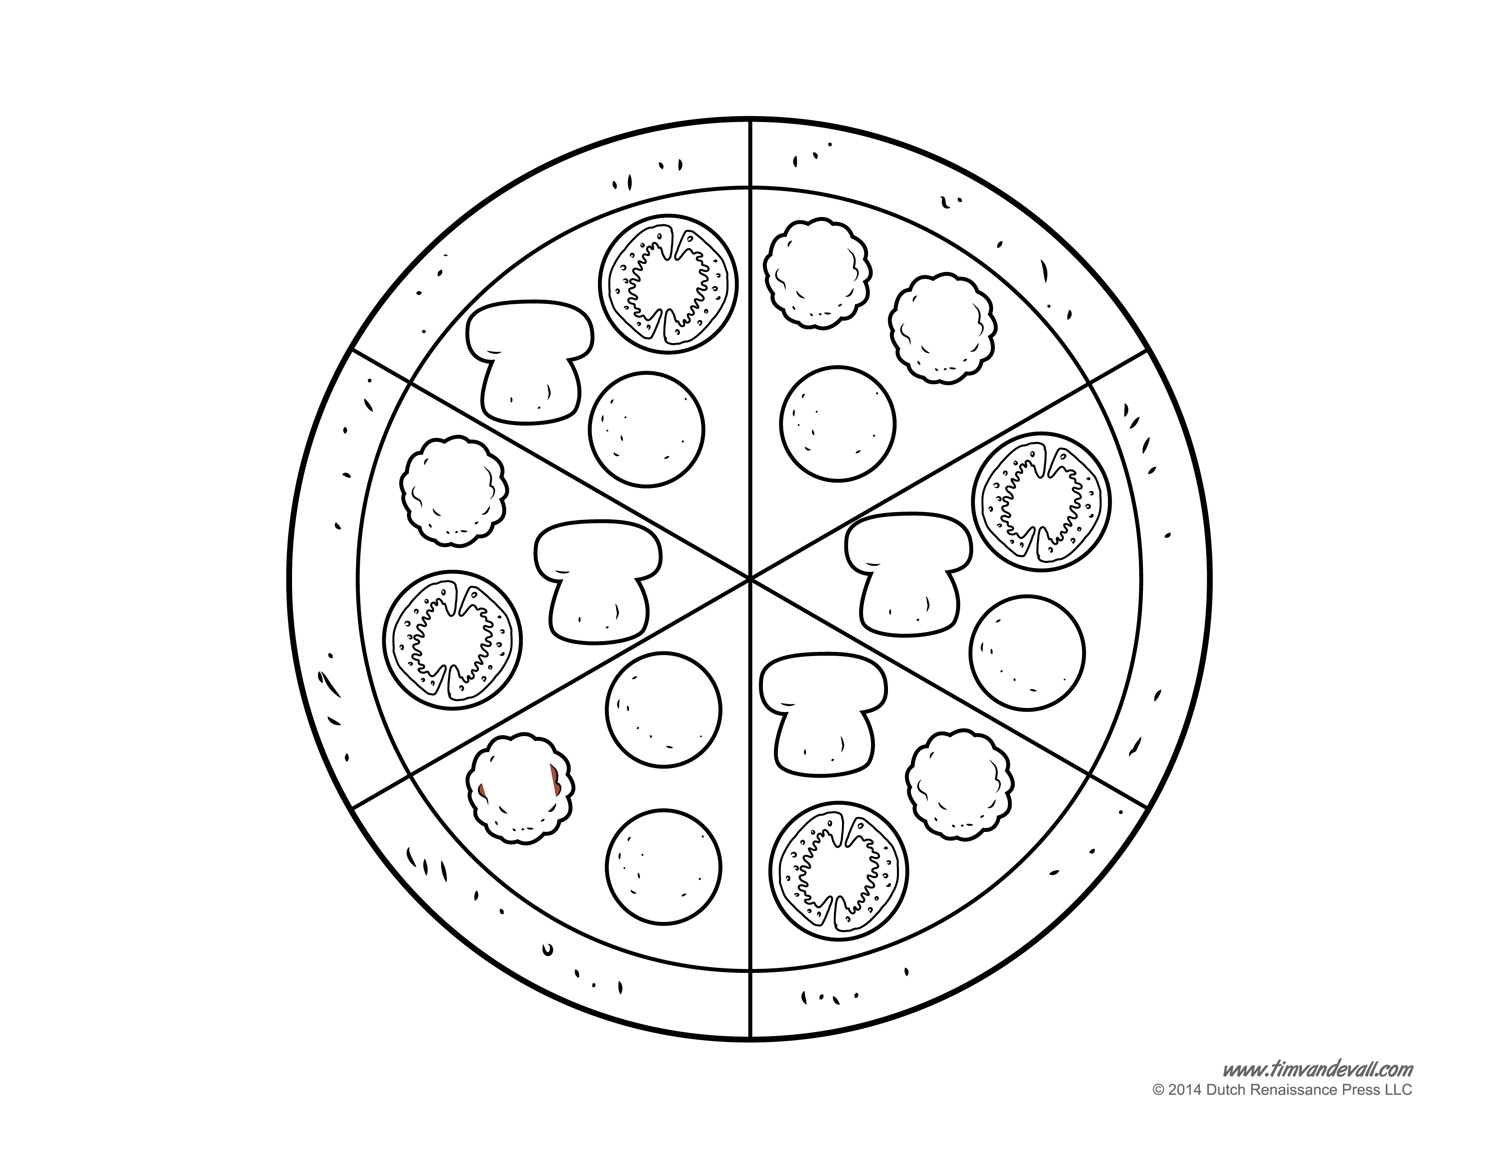 Printable Pizza Craft Template